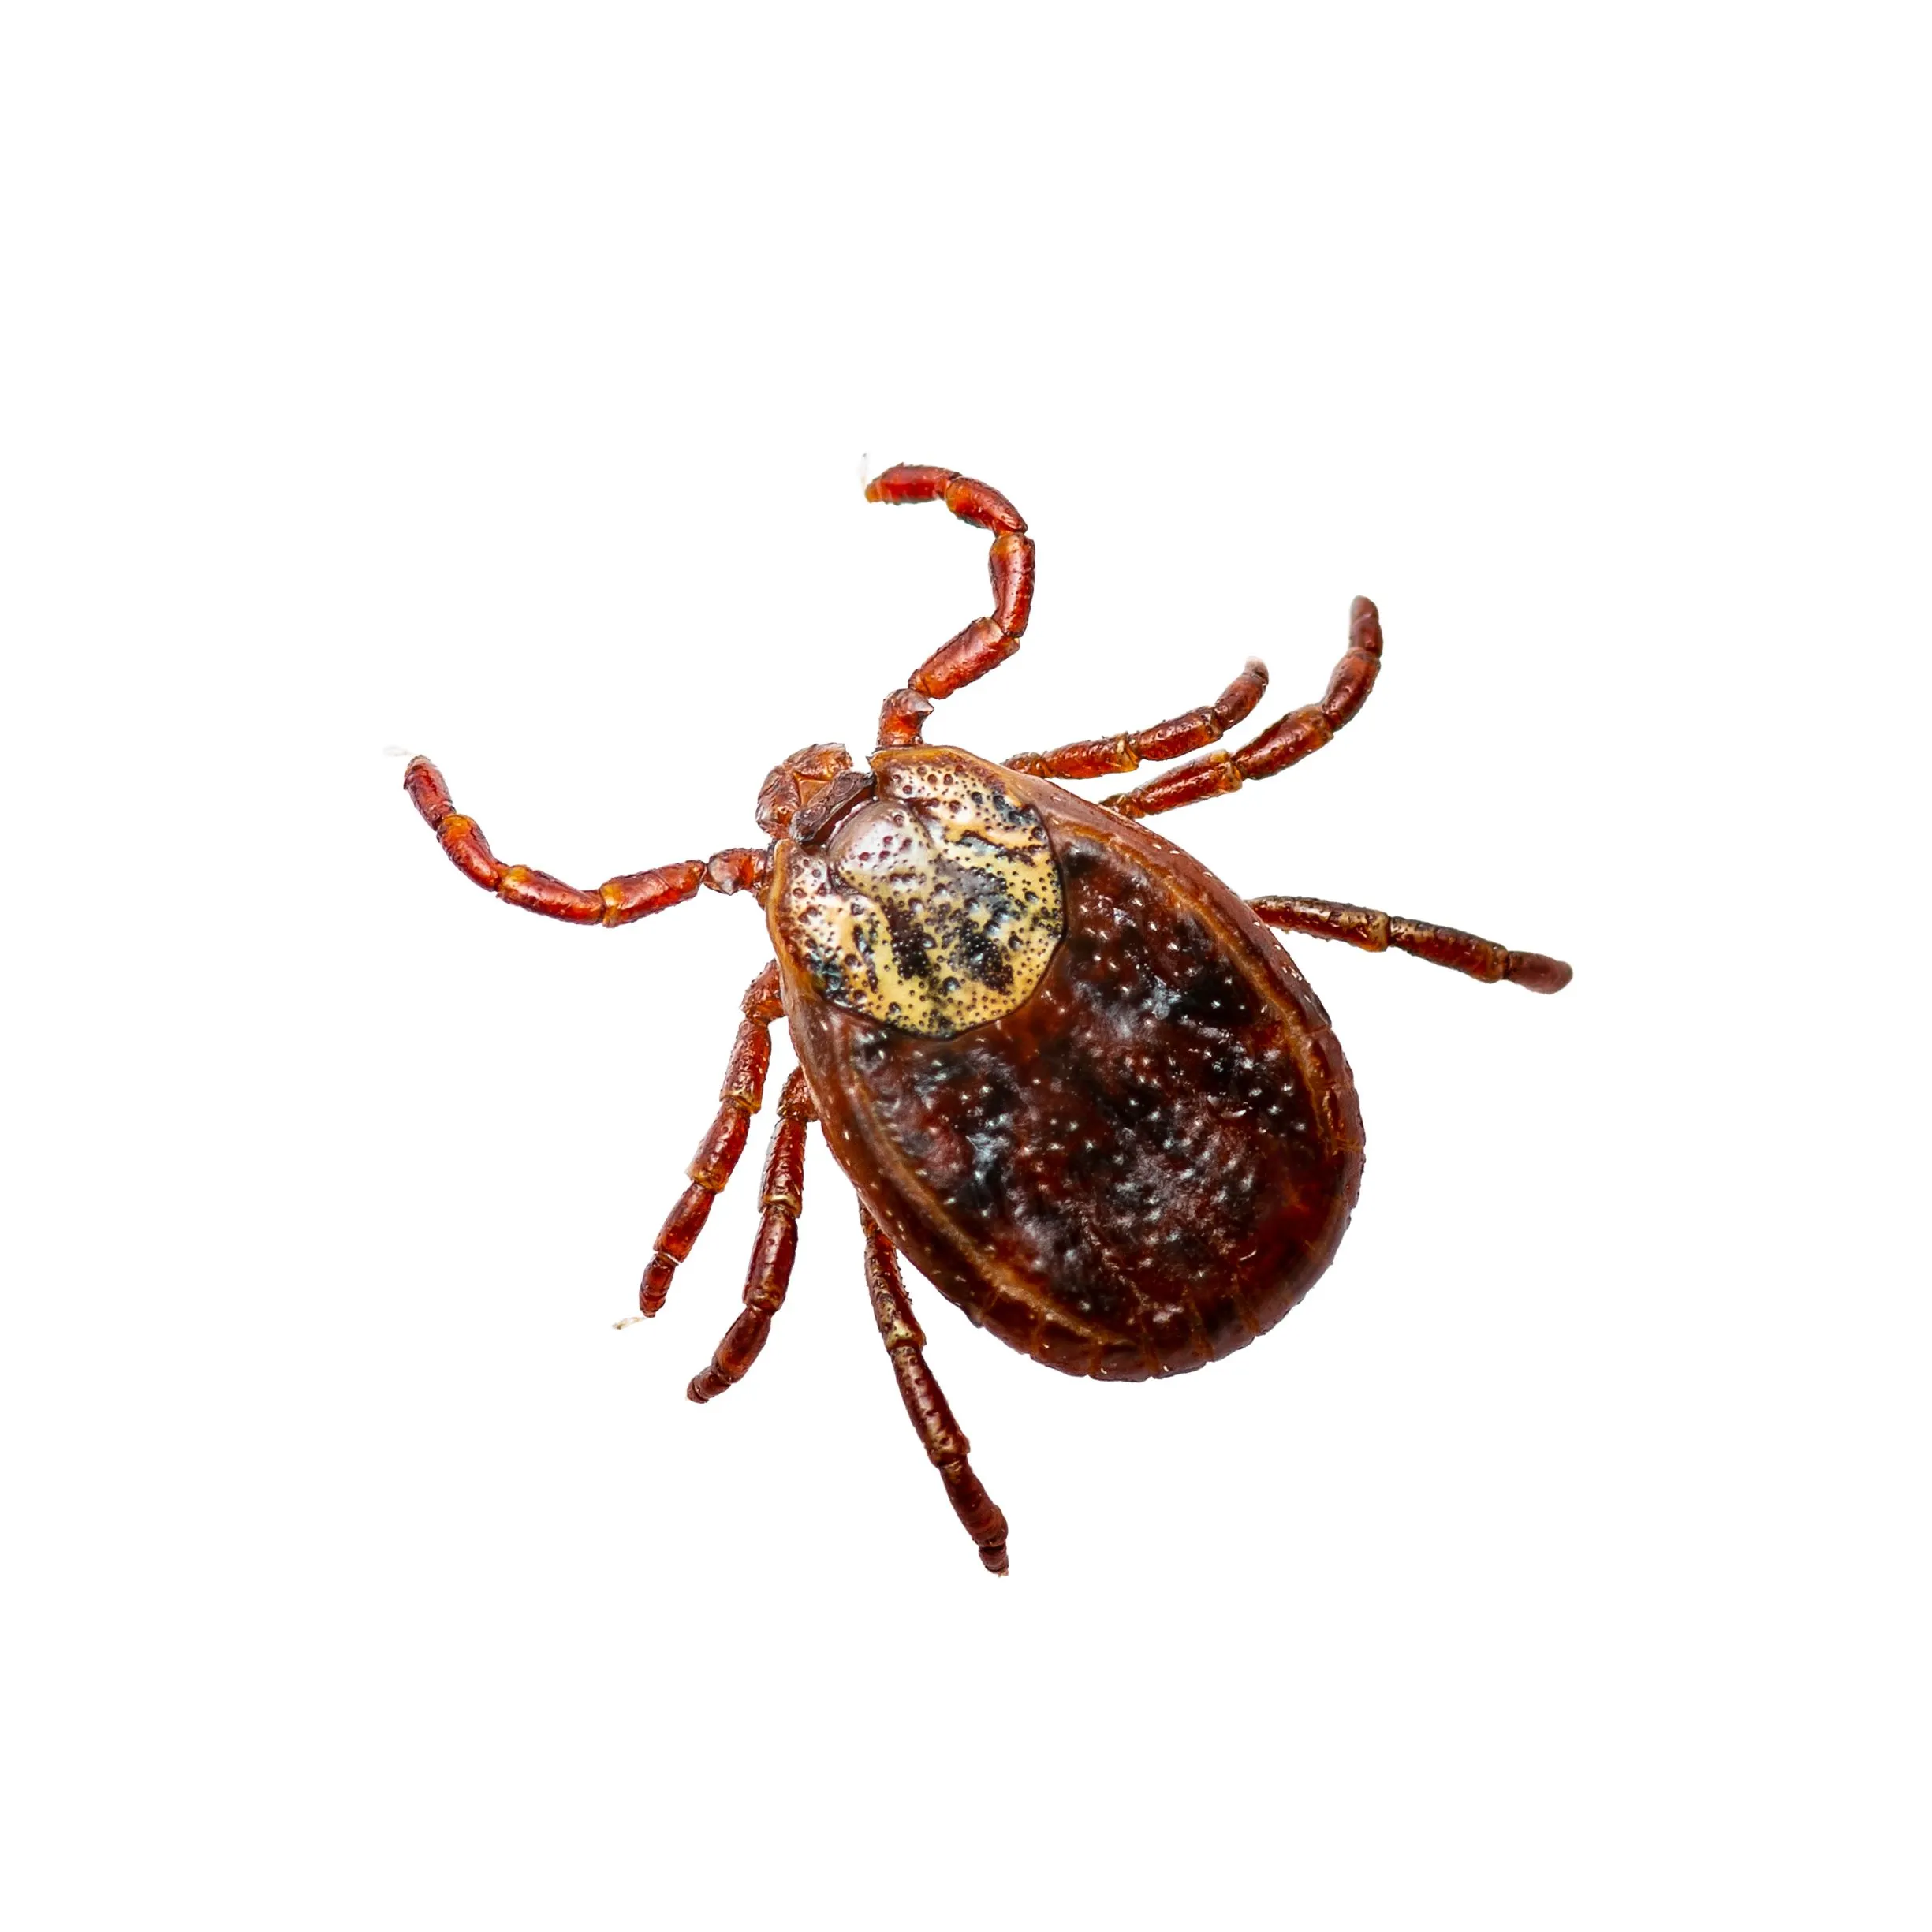 The Top Signs of a Tick Bite